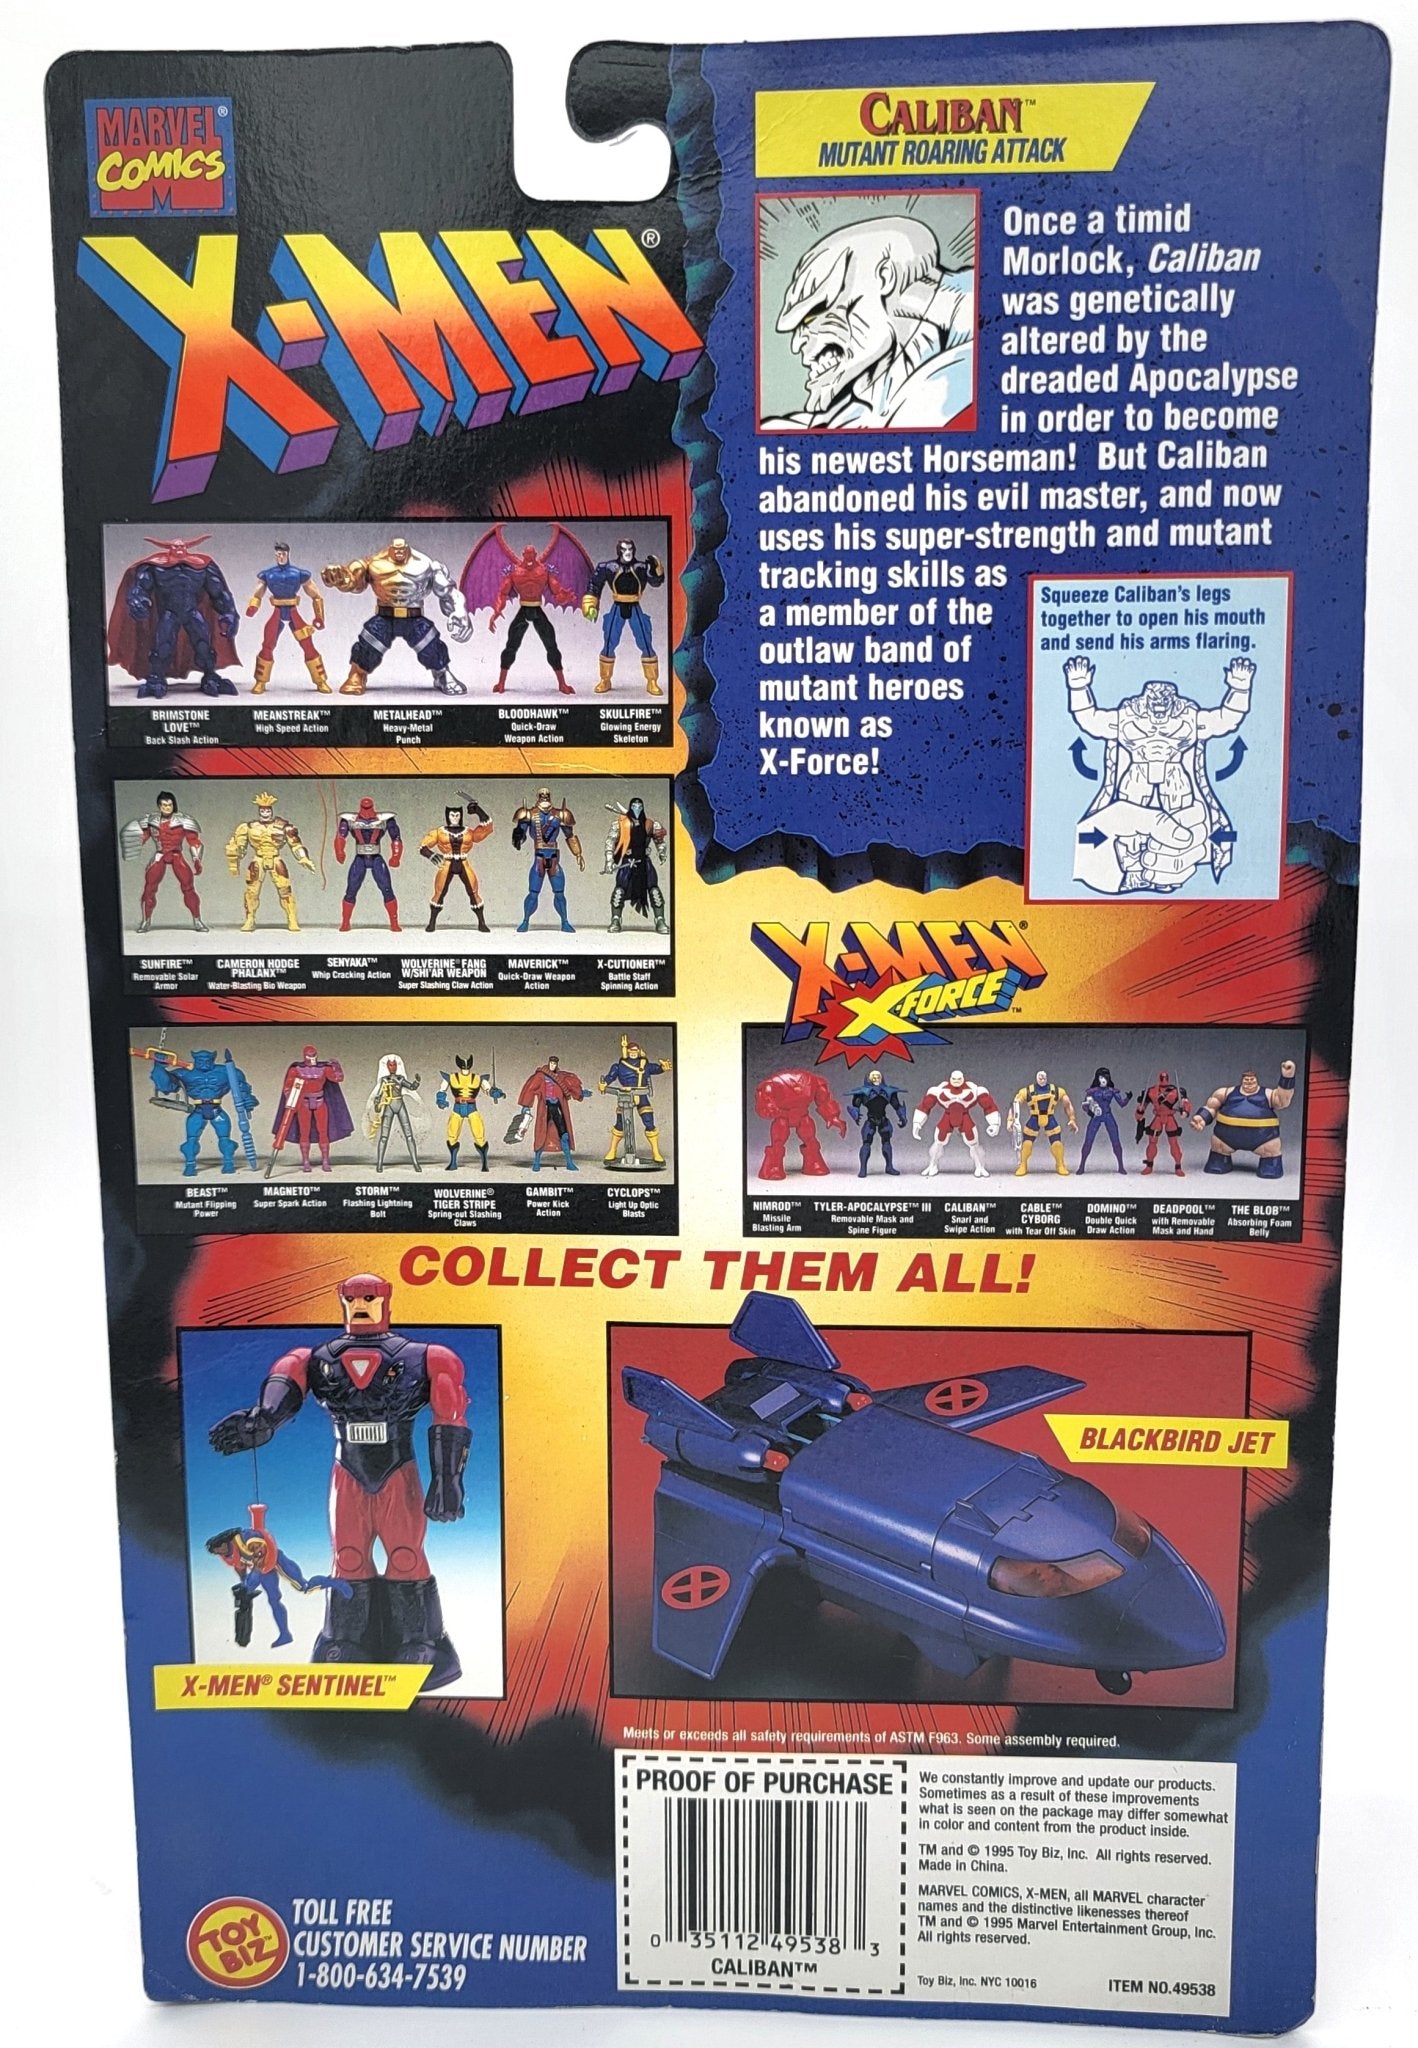 Toy Biz - Toy Biz | X-Men X-Force Caliban with Collectable Card | Vintage Marvel Action Figure - Action Figures - Steady Bunny Shop